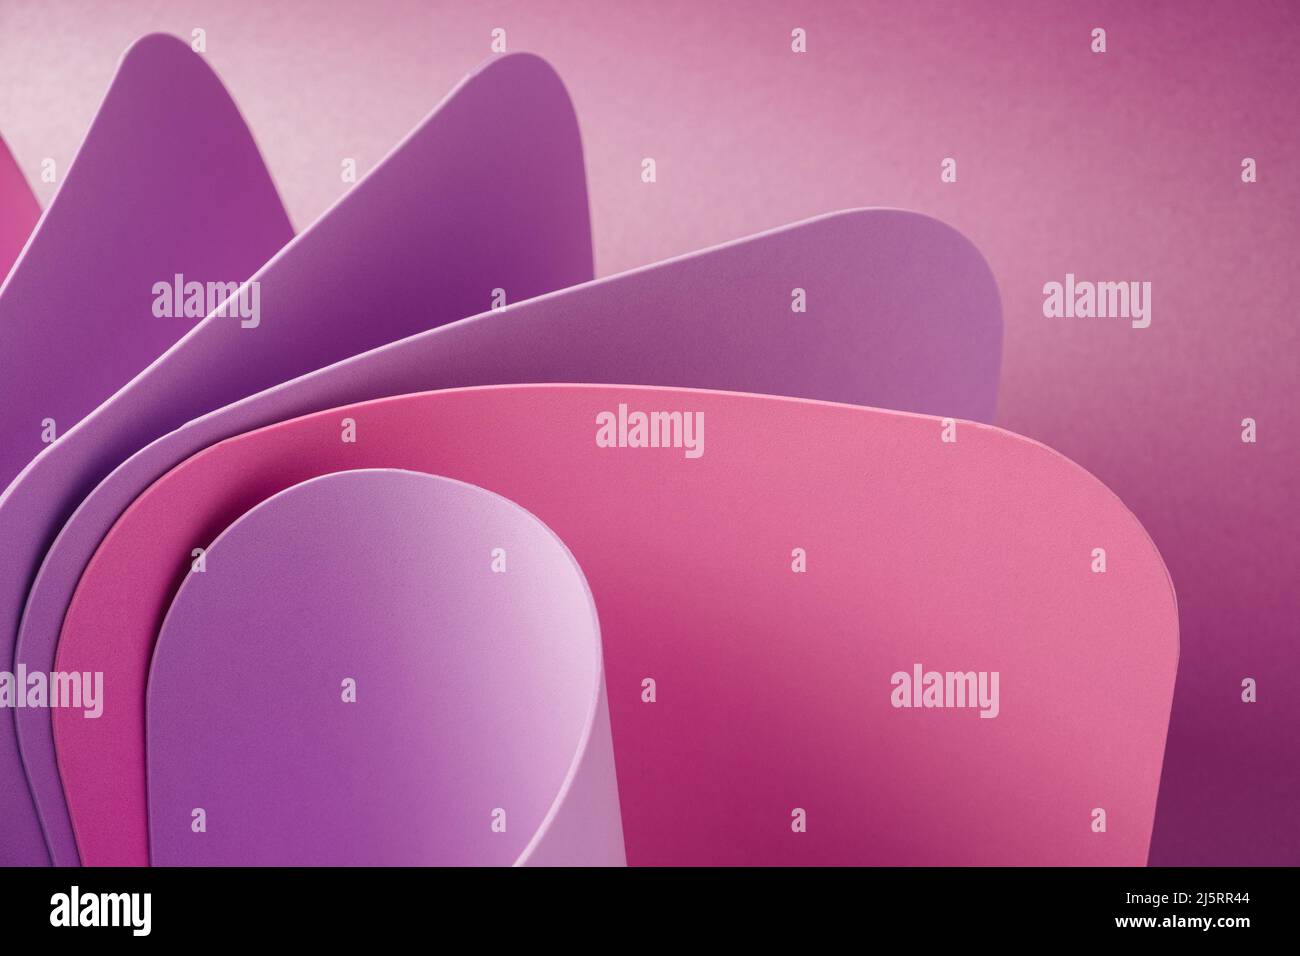 Pink and violet abstract shapes on a purple background. Elegant soft backdrop. Stock Photo